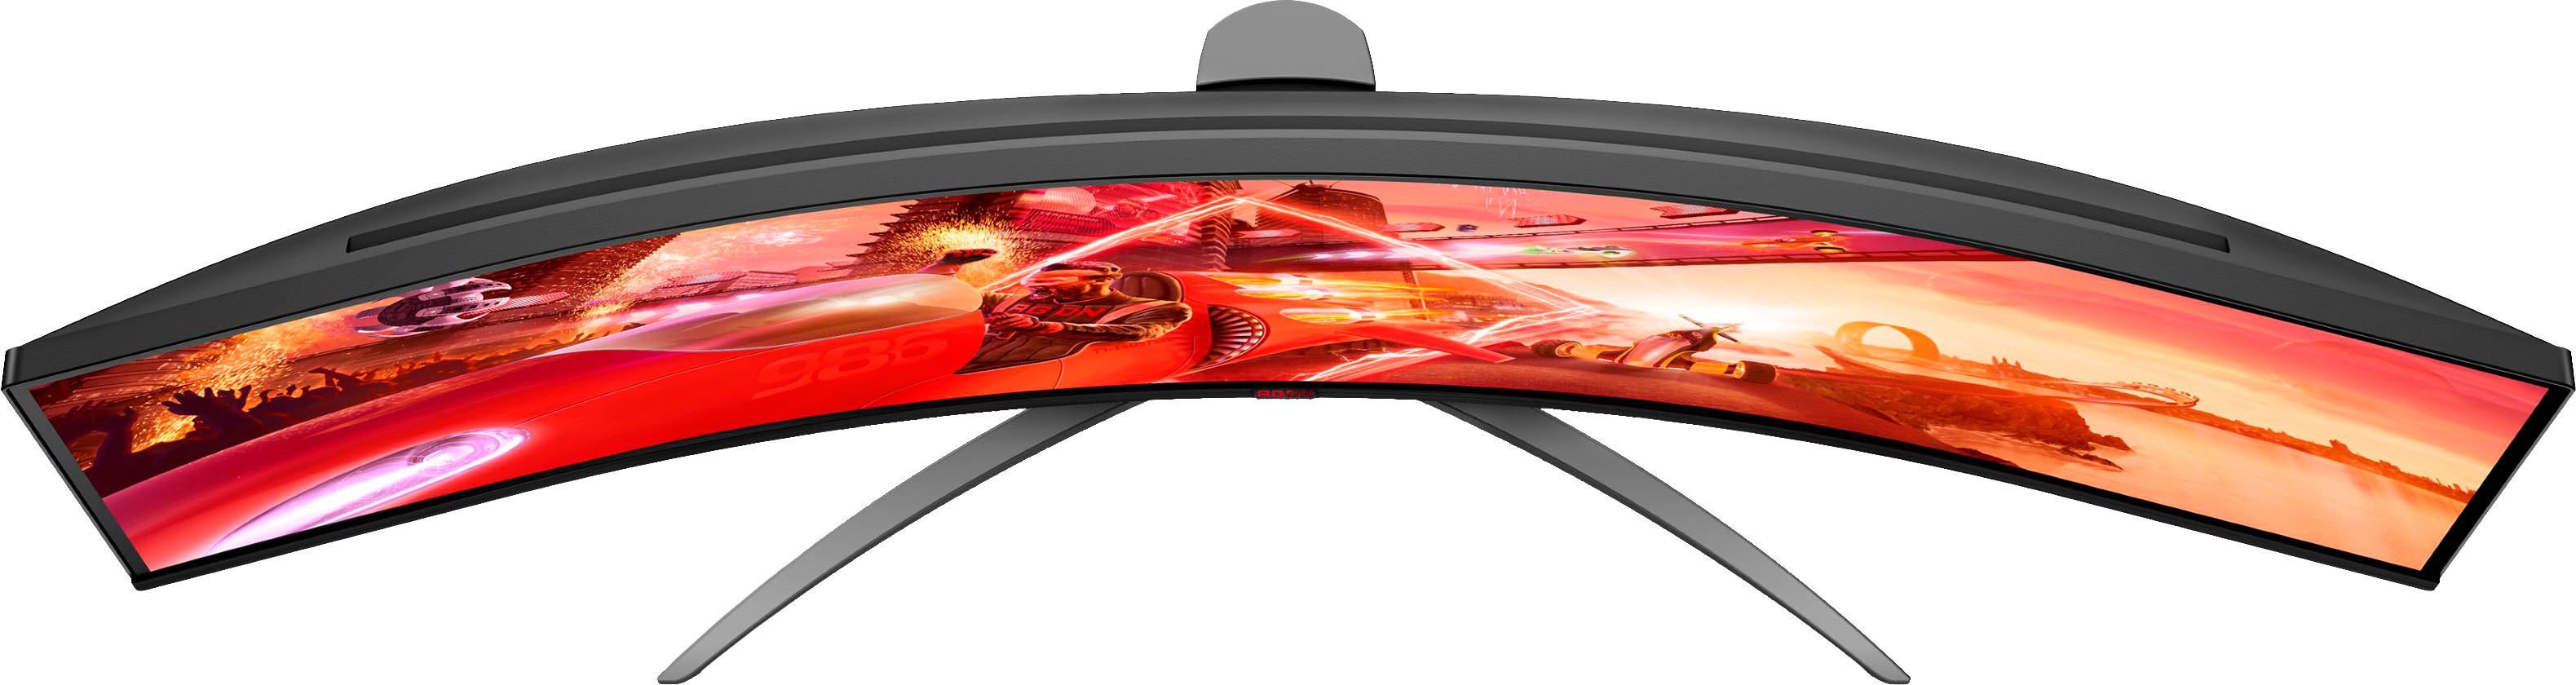 AOC AG493UCX2 48.8 DQHD HDR 165 Hz Curved Gaming AG493UCX2 B&H